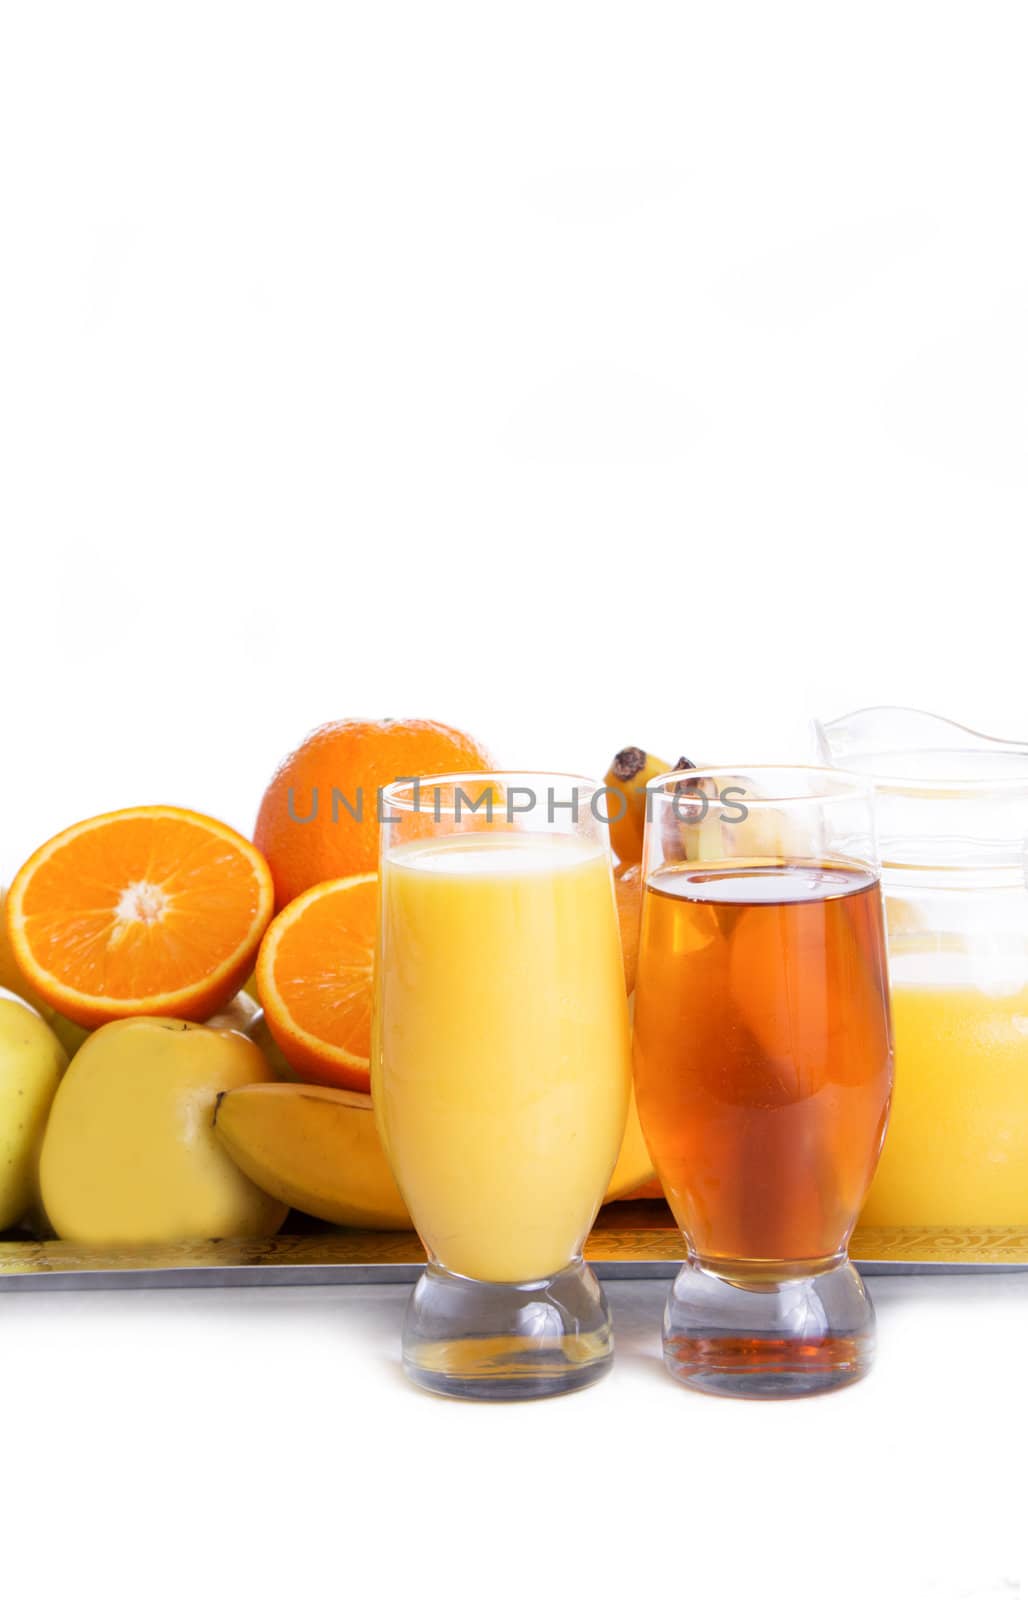 Apple and orange fruits with juice by Angel_a